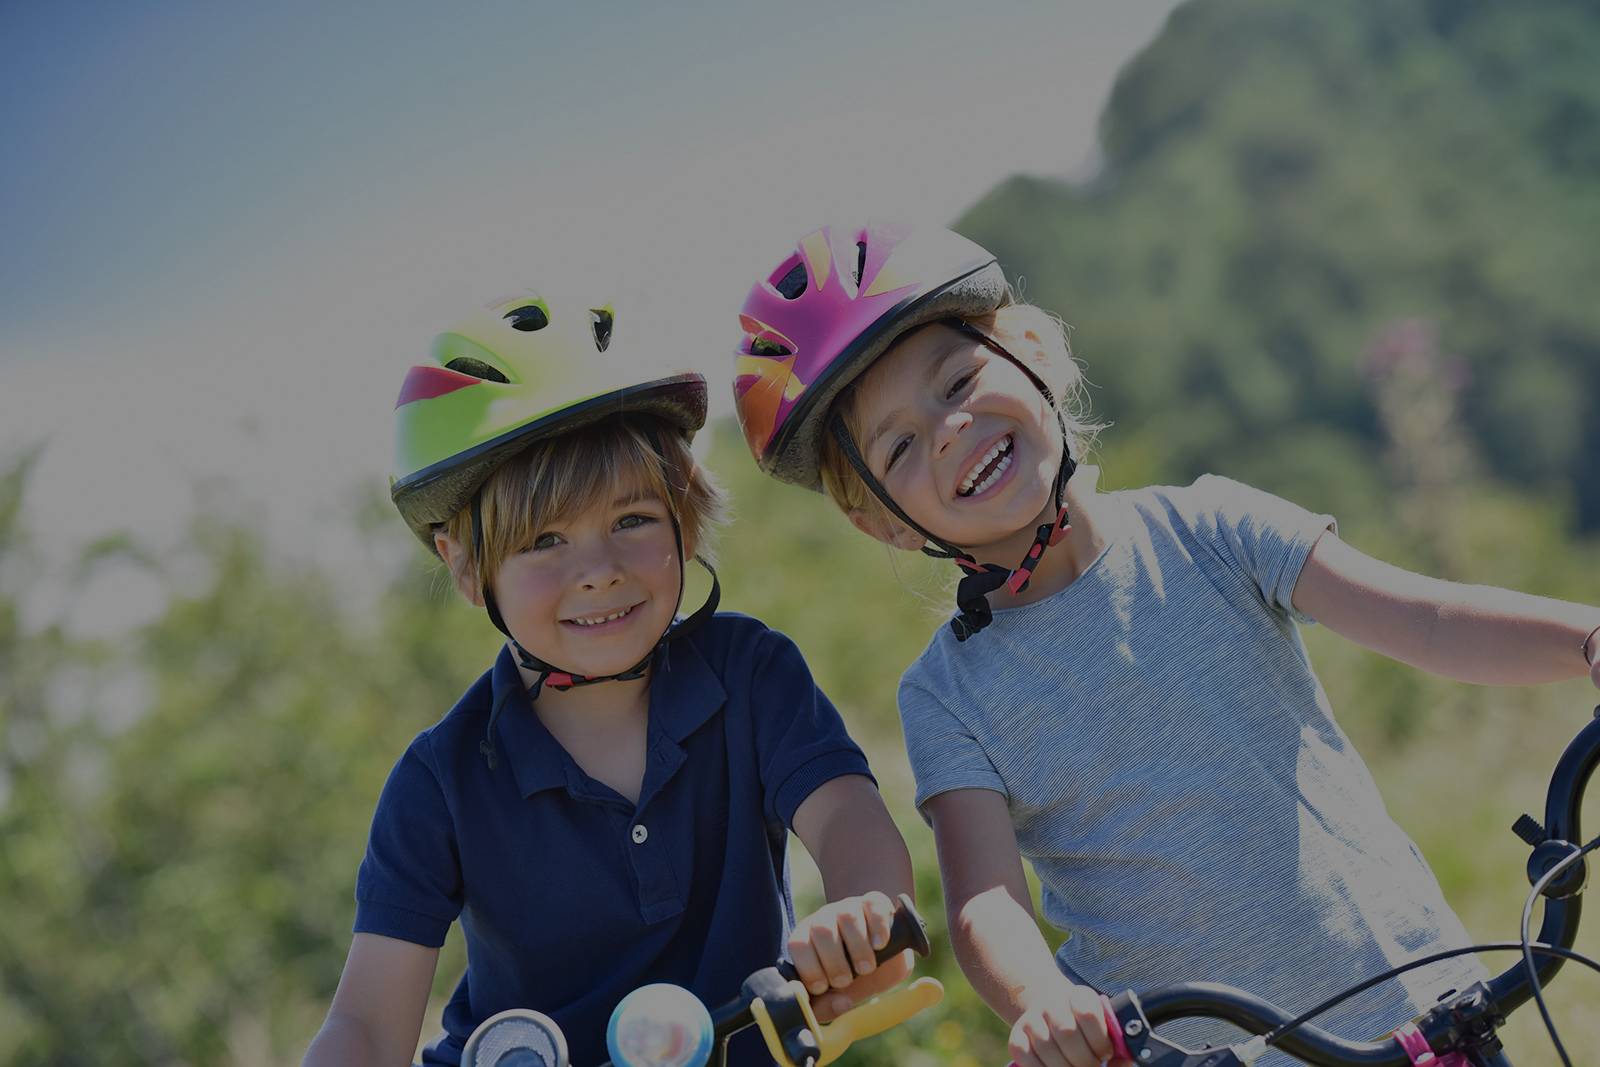 A boy and a girl wearing bike helmets in a bicycle